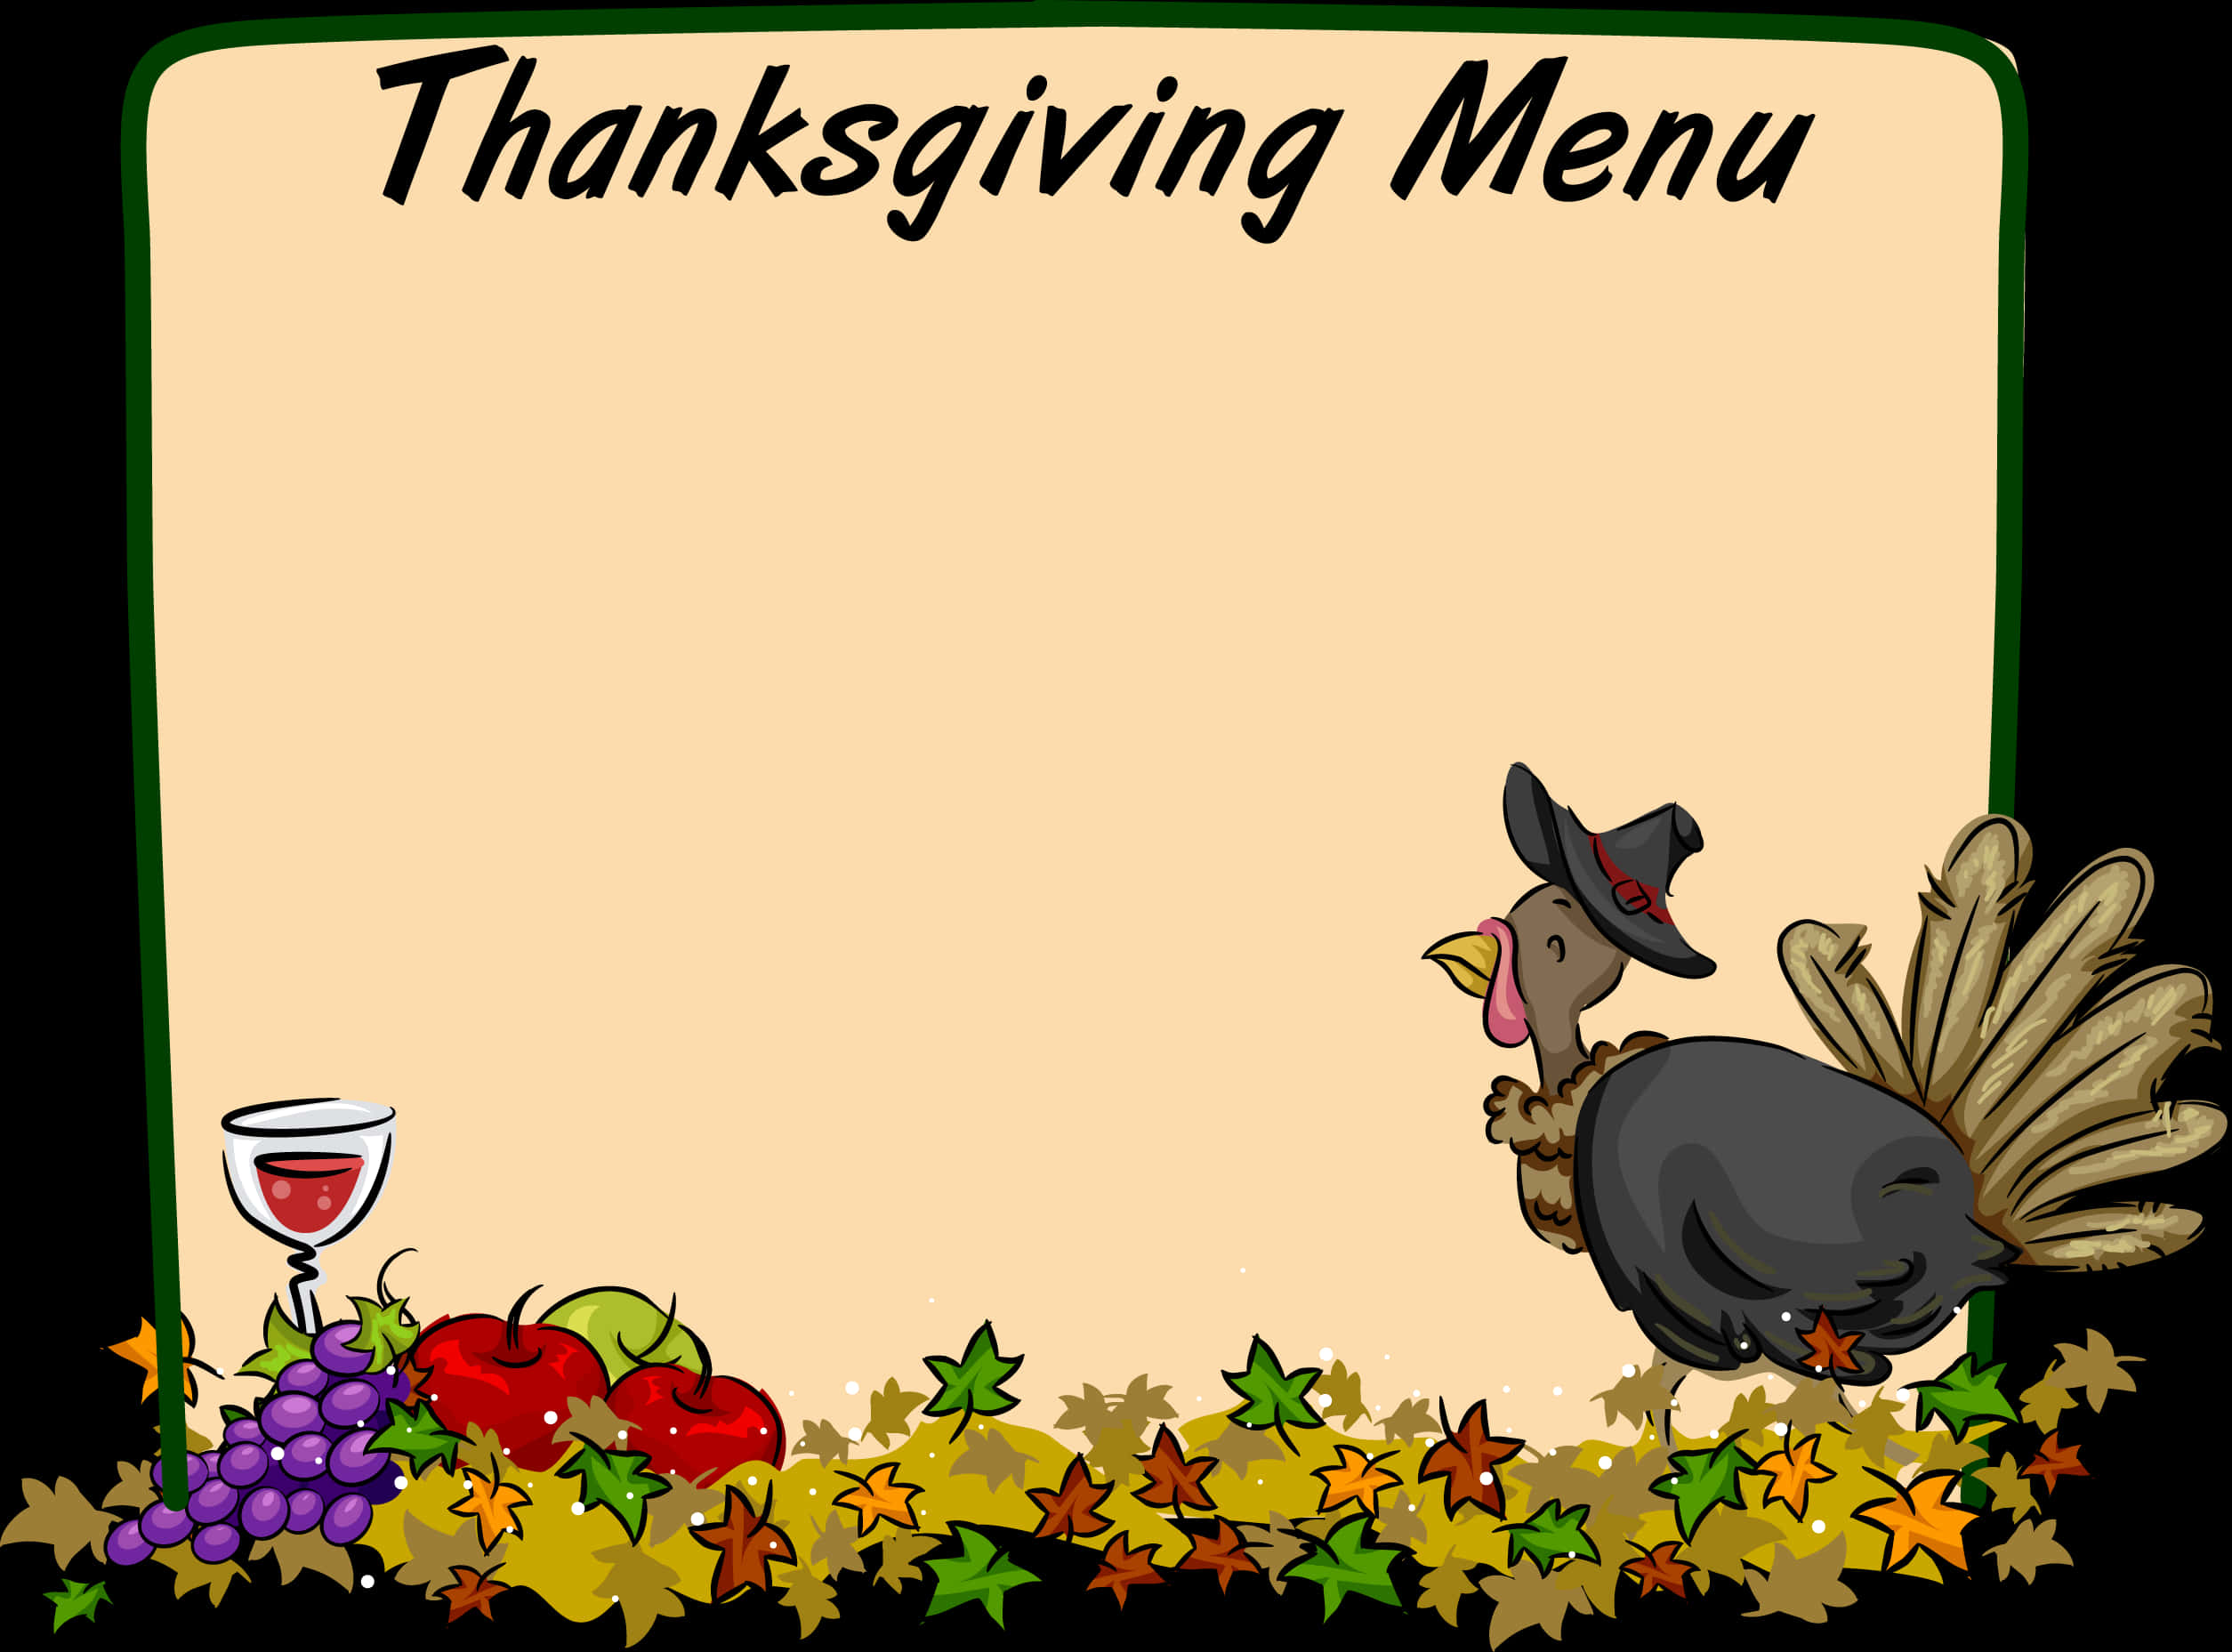 A Thanksgiving Menu With A Turkey And Fruit PNG